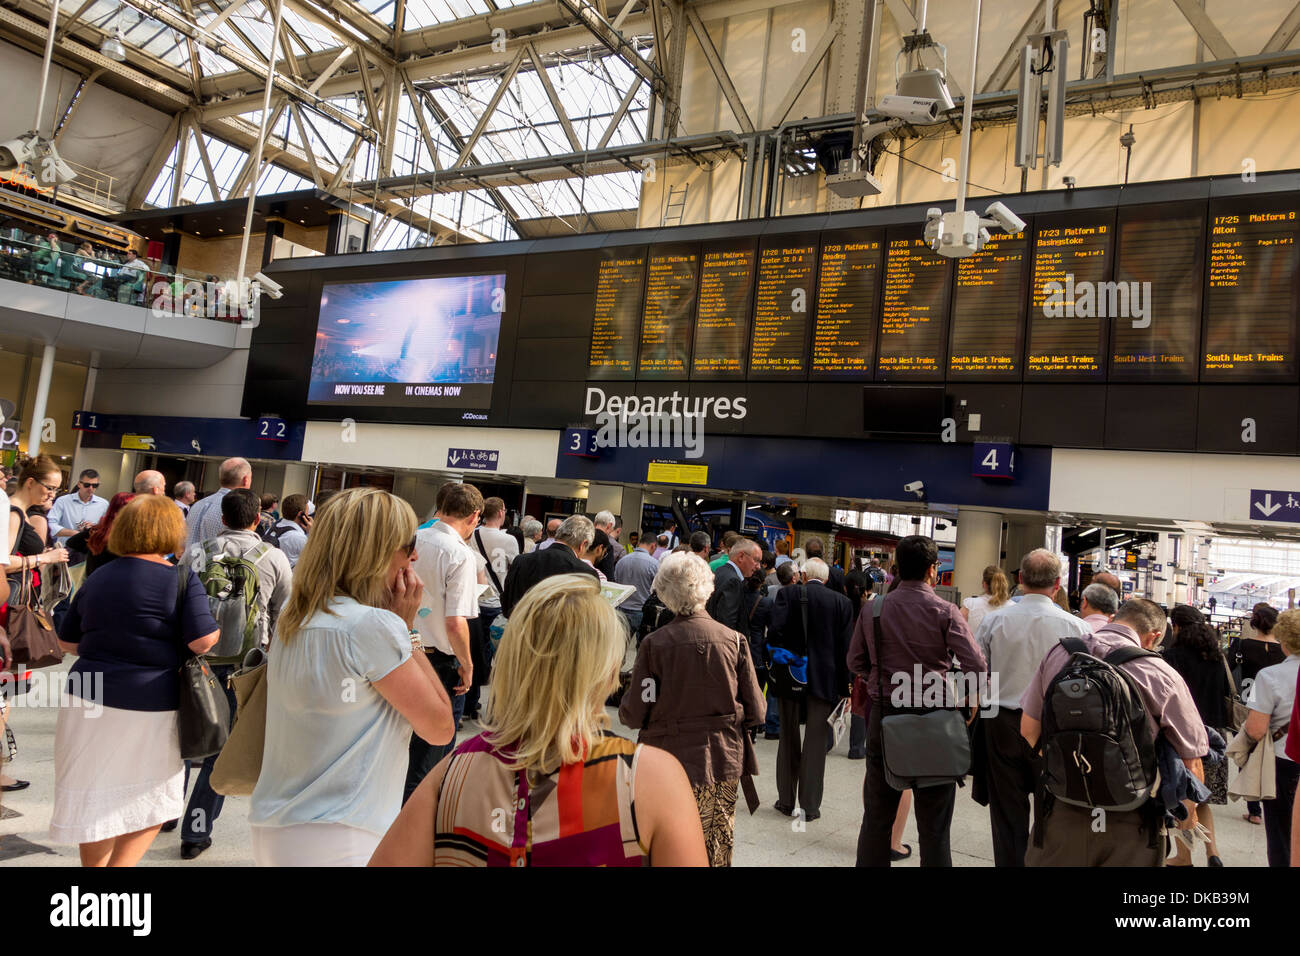 Passengers looking at Departure Information Board, London Waterloo Station Concourse, UK Stock Photo